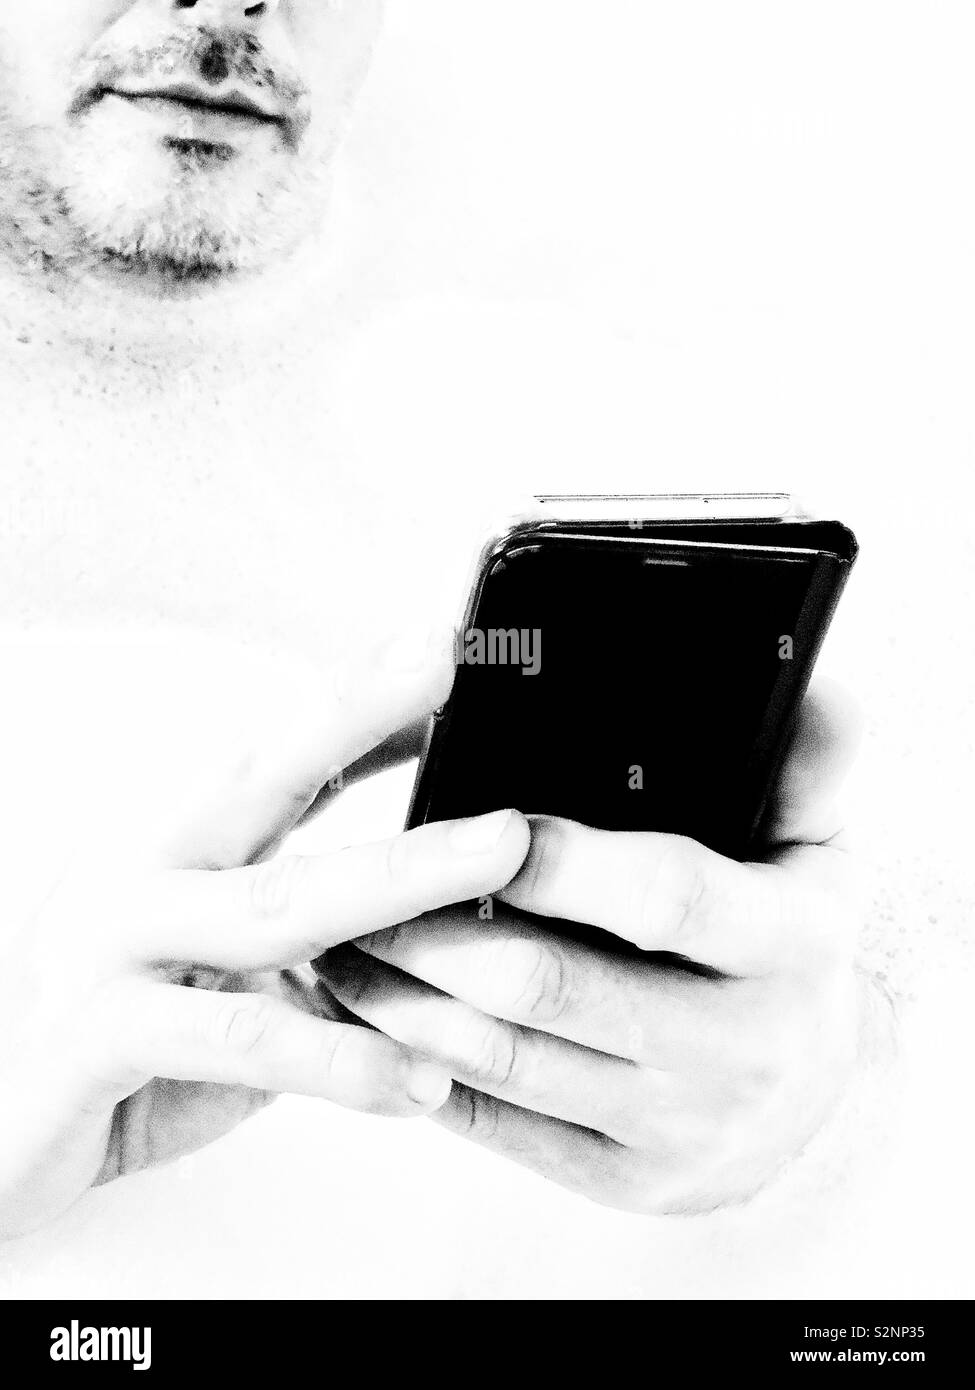 Lower half of face of unshaven man using smartphone Stock Photo